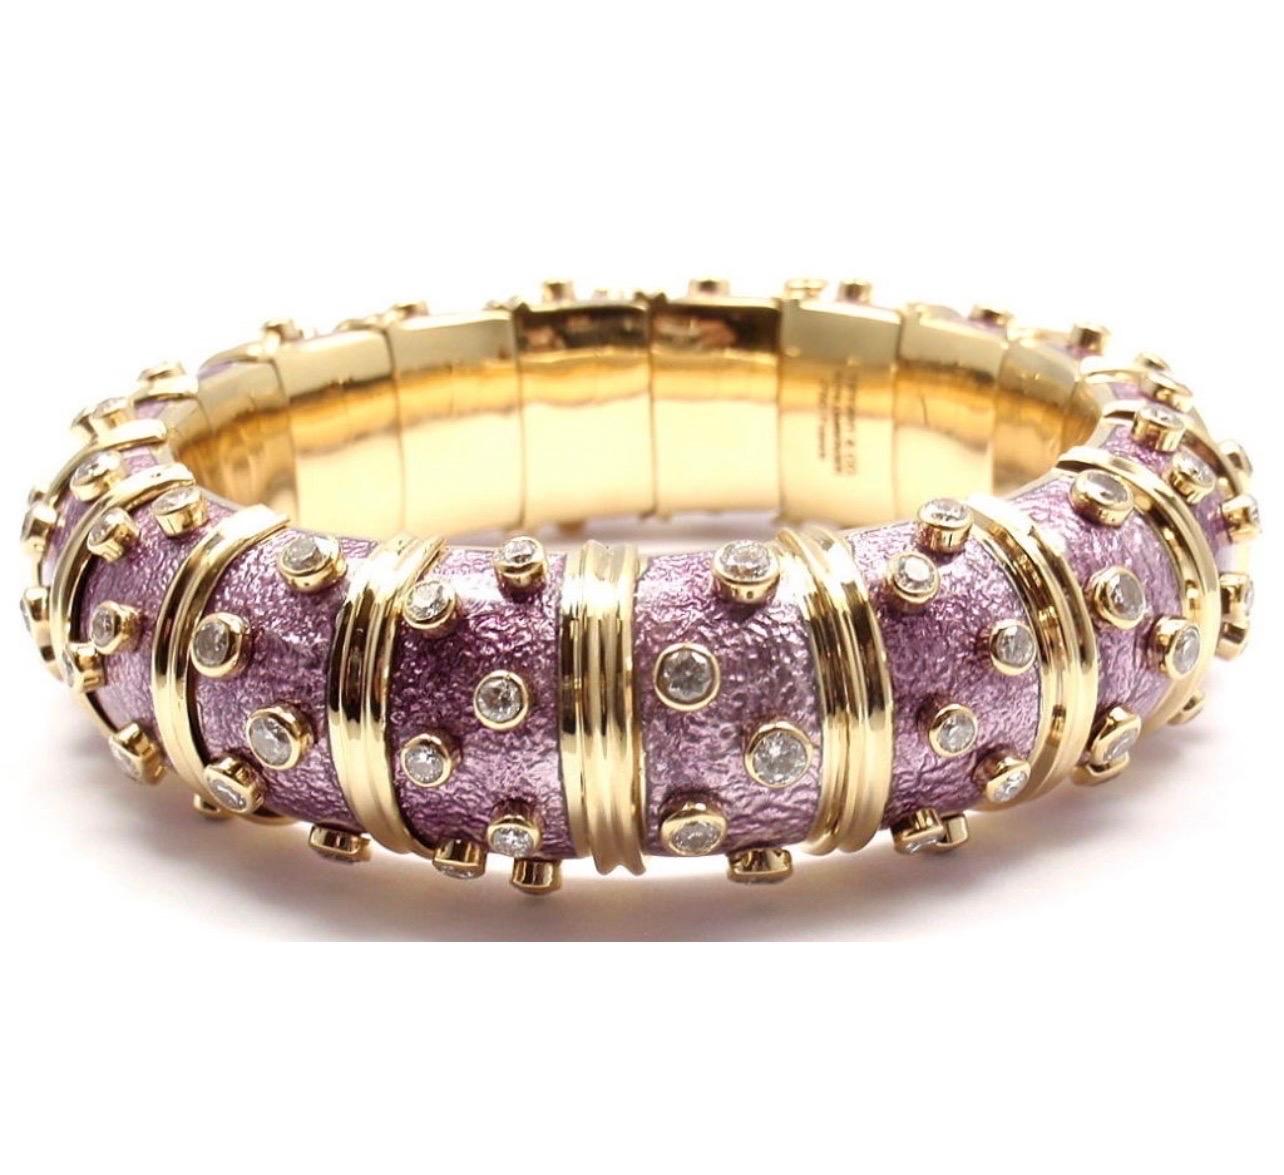 Tiffany & Co. Schlumberger 18 Kt Gold Lavender Enamel 5.96 Ct Diamond Bangle In Excellent Condition For Sale In New York, NY